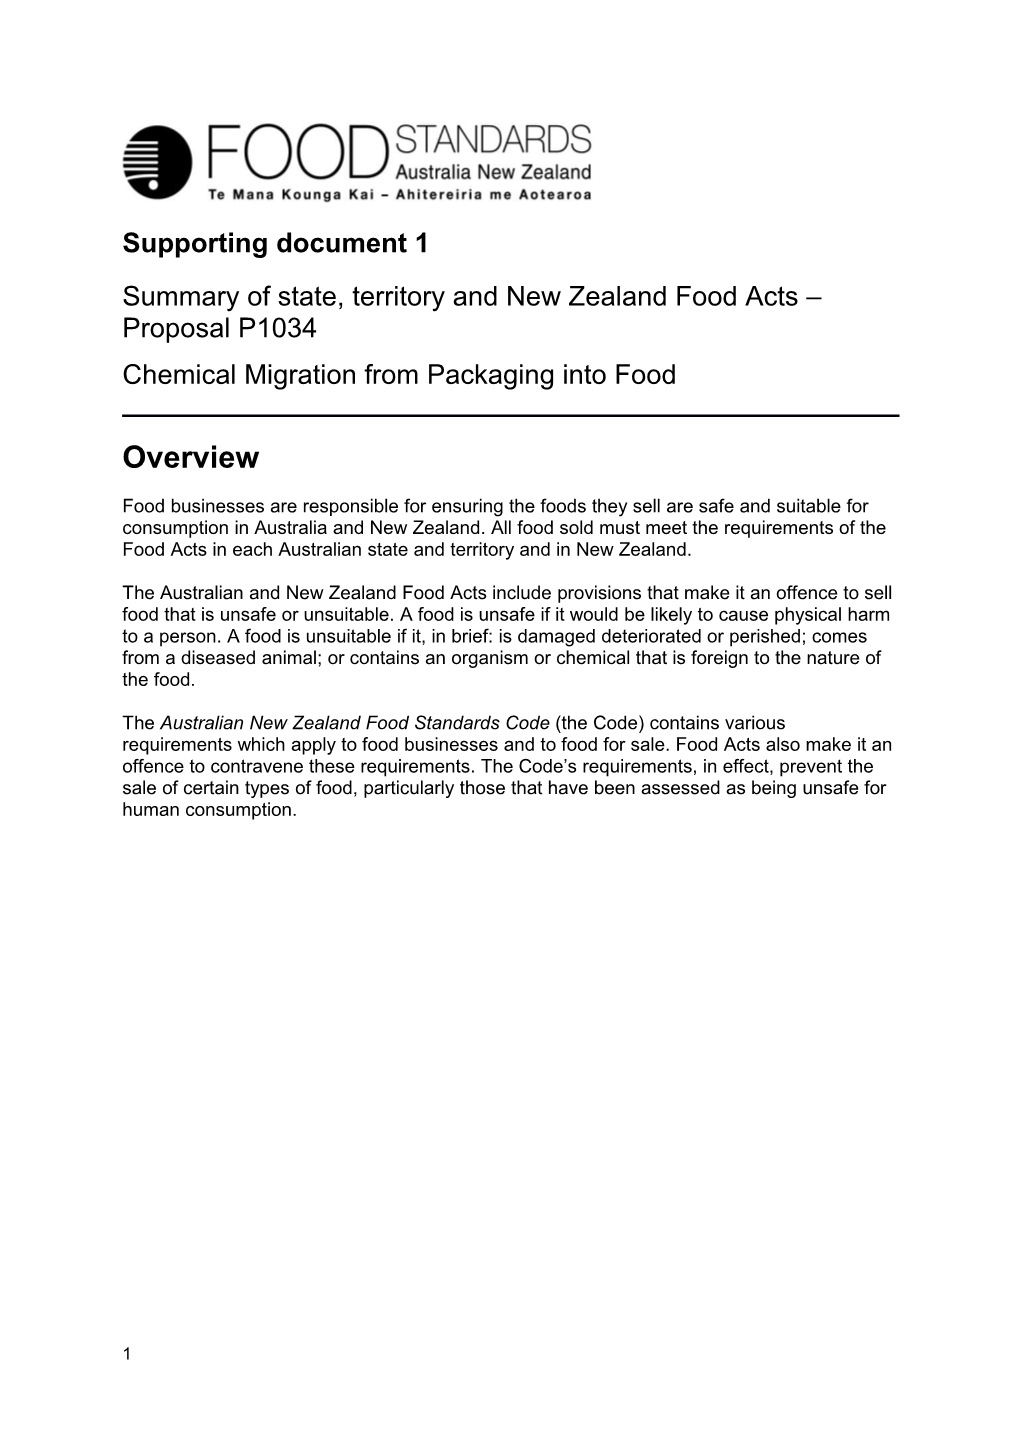 Summary of State, Territory and New Zealand Food Acts Proposal P1034